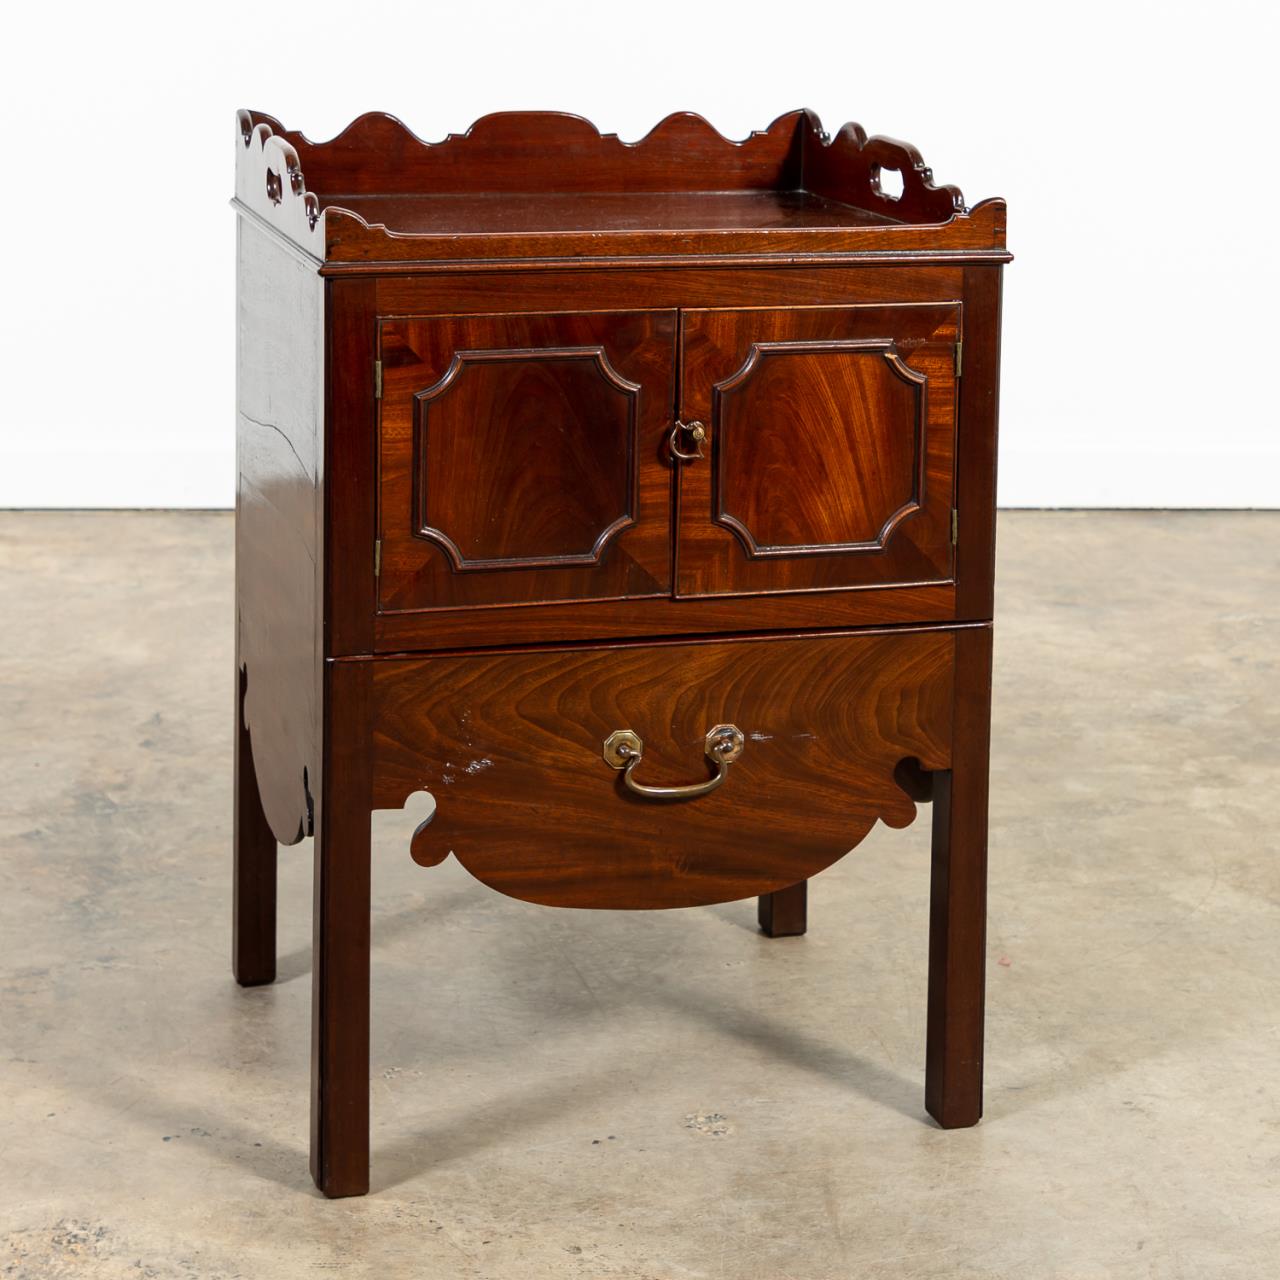 GEORGIAN COMMODE WITH LEATHER TOP